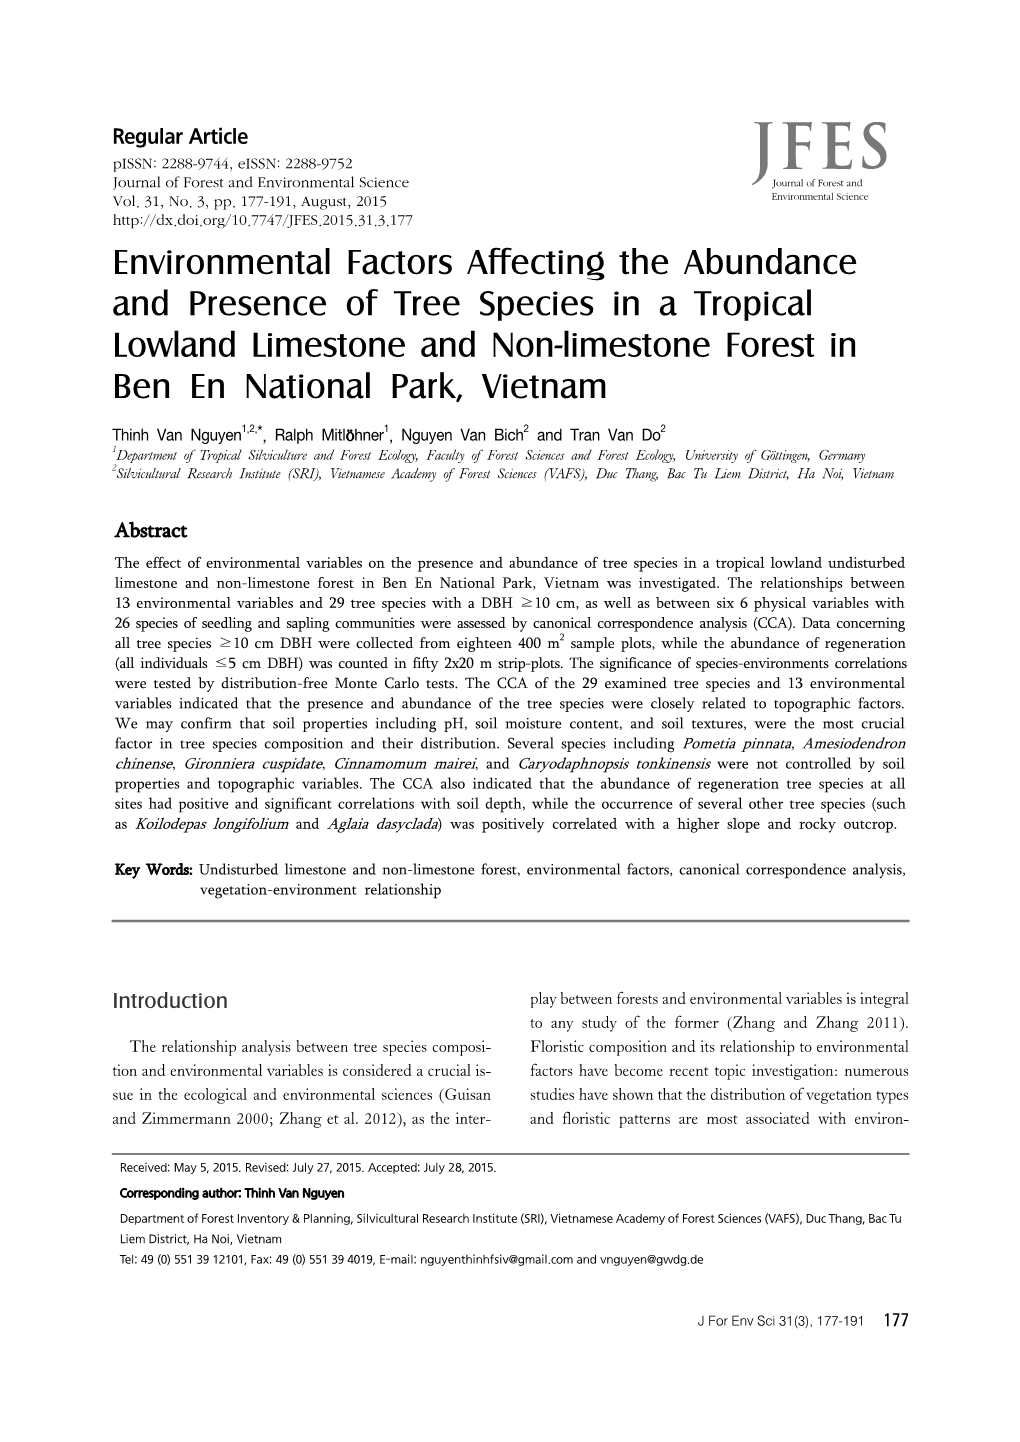 Environmental Factors Affecting the Abundance and Presence of Tree Species in a Tropical Lowland Limestone and Non-Limestone Forest in Ben En National Park, Vietnam